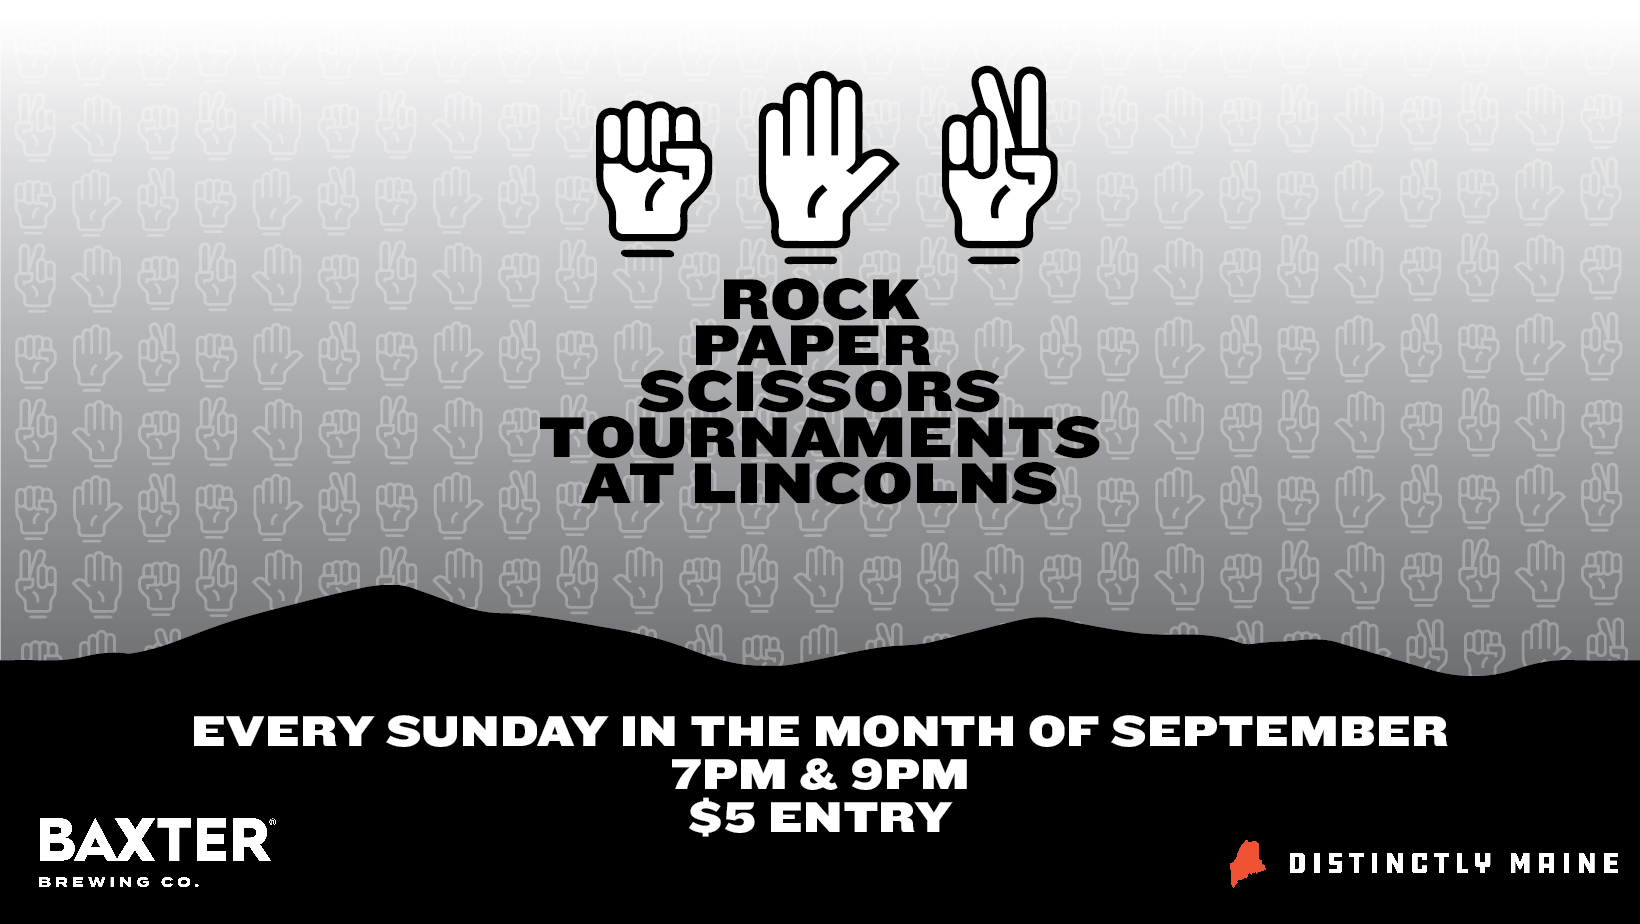 image of rock paper scissors tournament happening every sunday in september at Lincolns in Portland